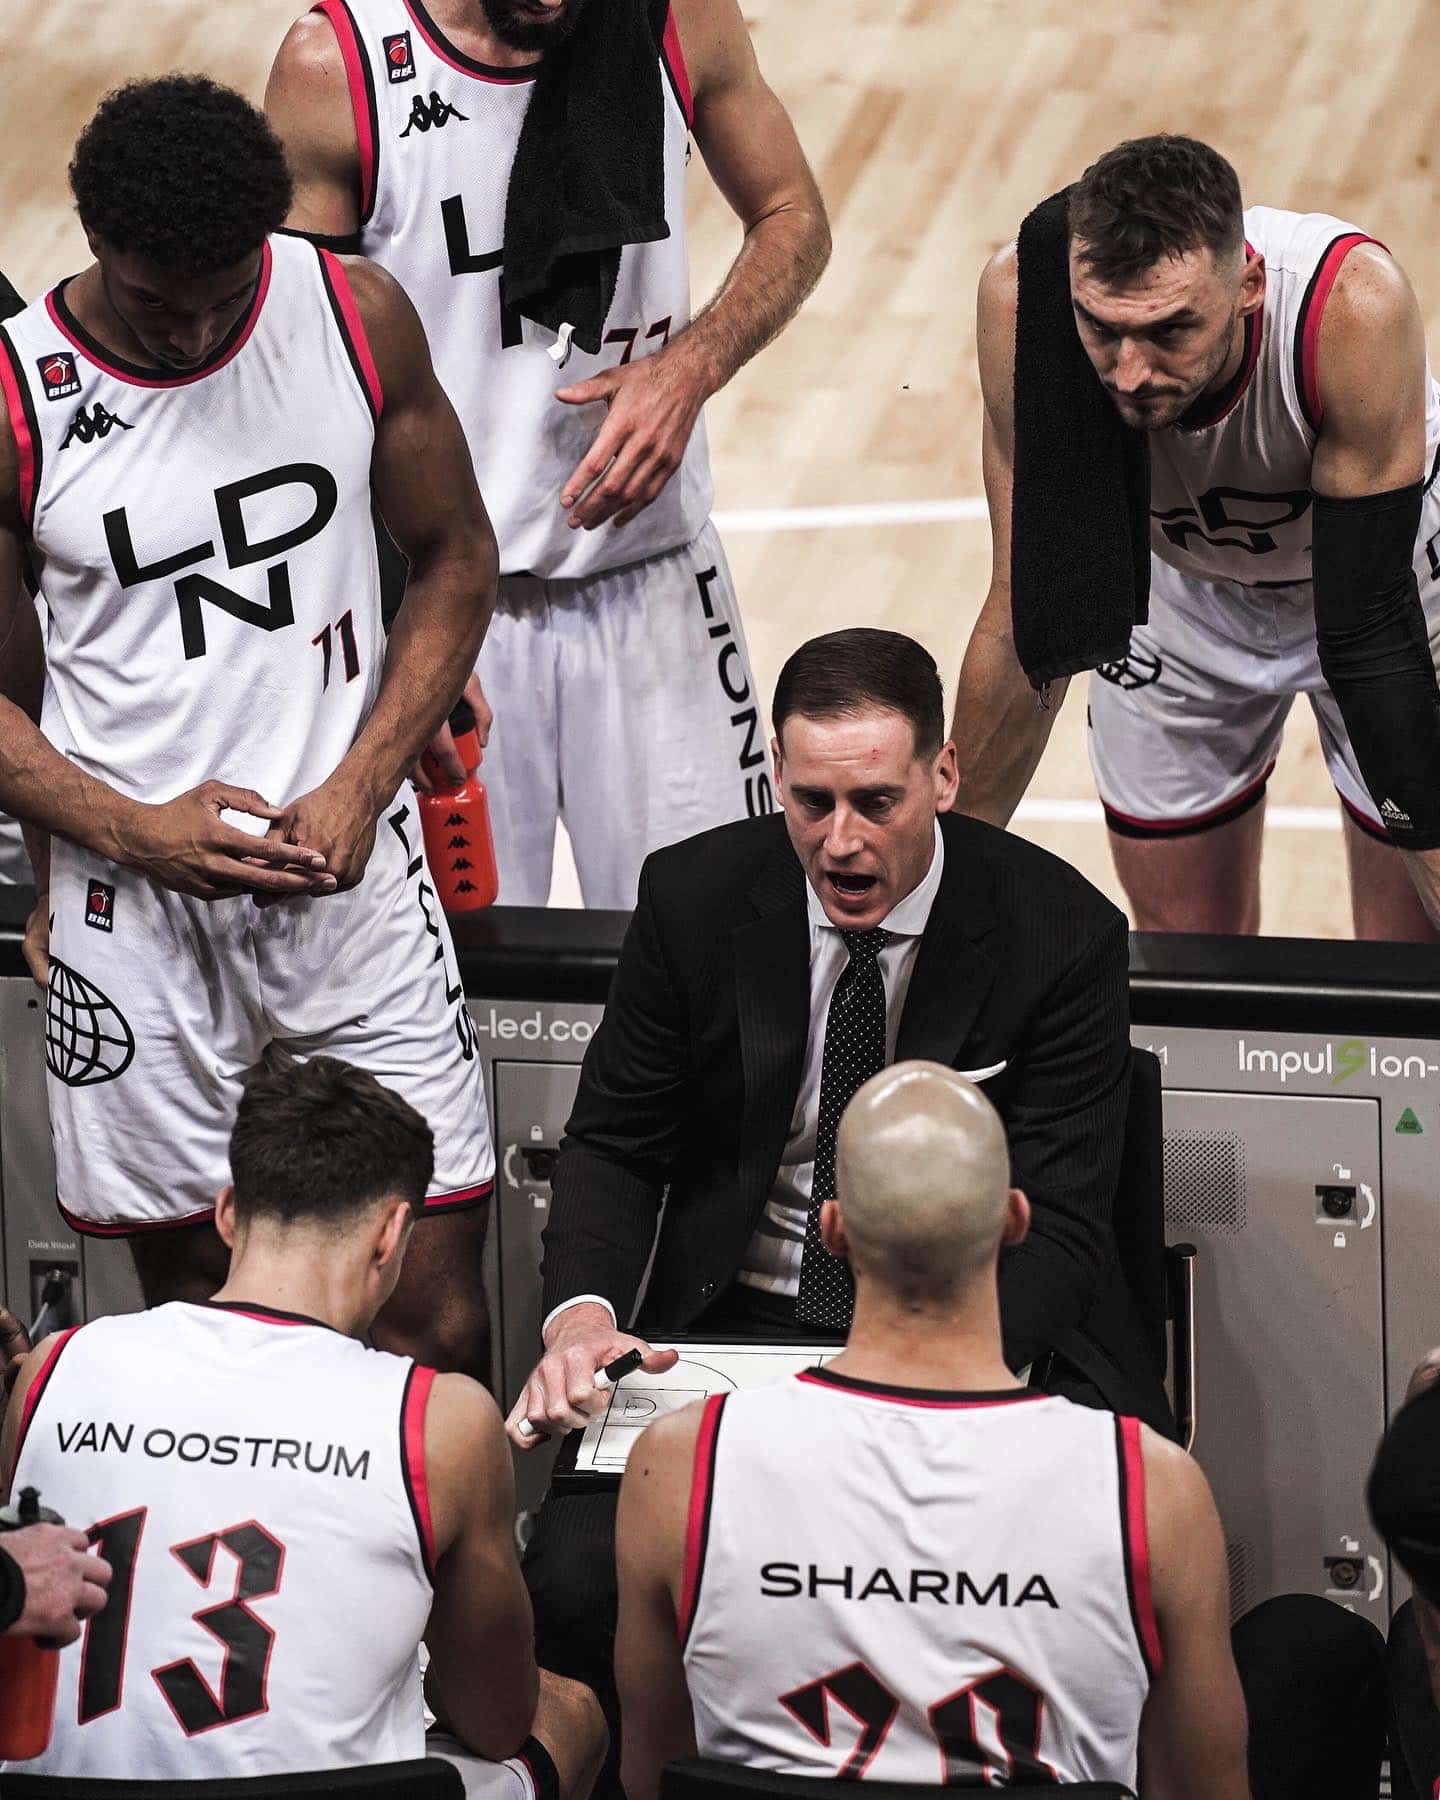 London lions coached on the sidelie